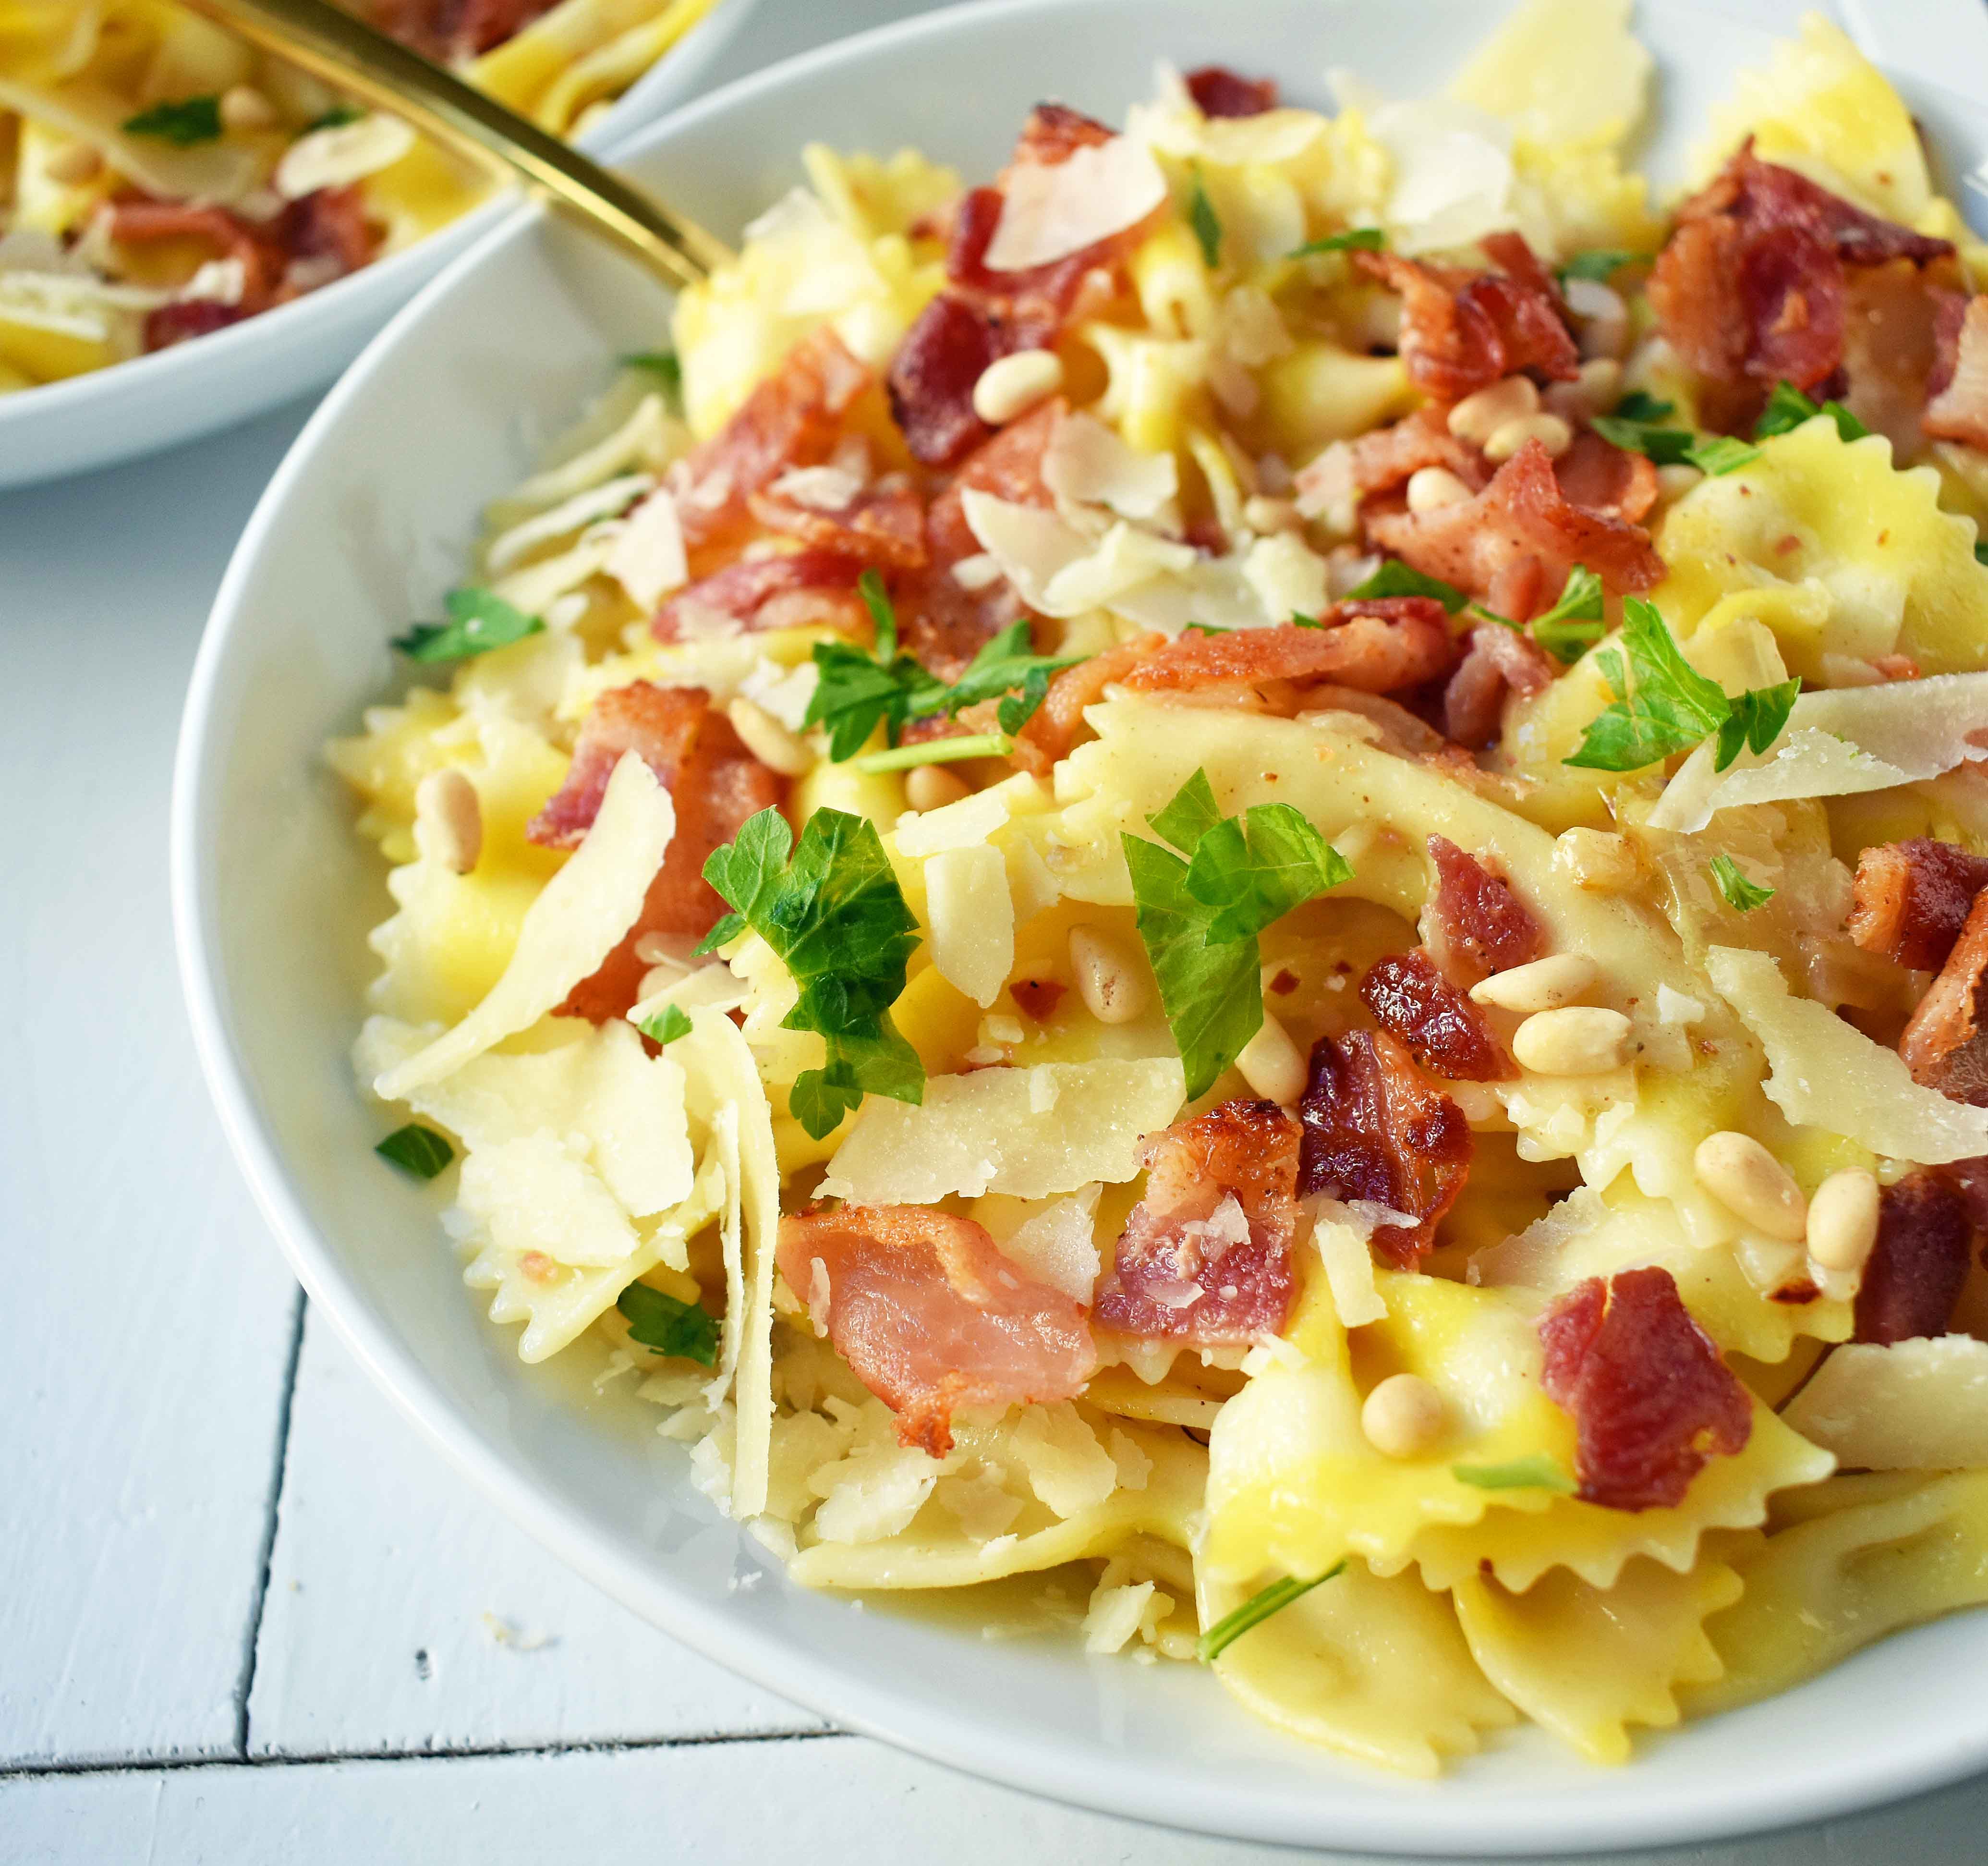 Lemon Garlic and Crispy Bacon Pasta. Farfalle, bowtie pasta, with butter, caramelized onions, and garlic all topped with crispy bacon, parmesan cheese, and pine nuts. A light and fresh pasta with lemon butter and bacon. www.modernhoney.com